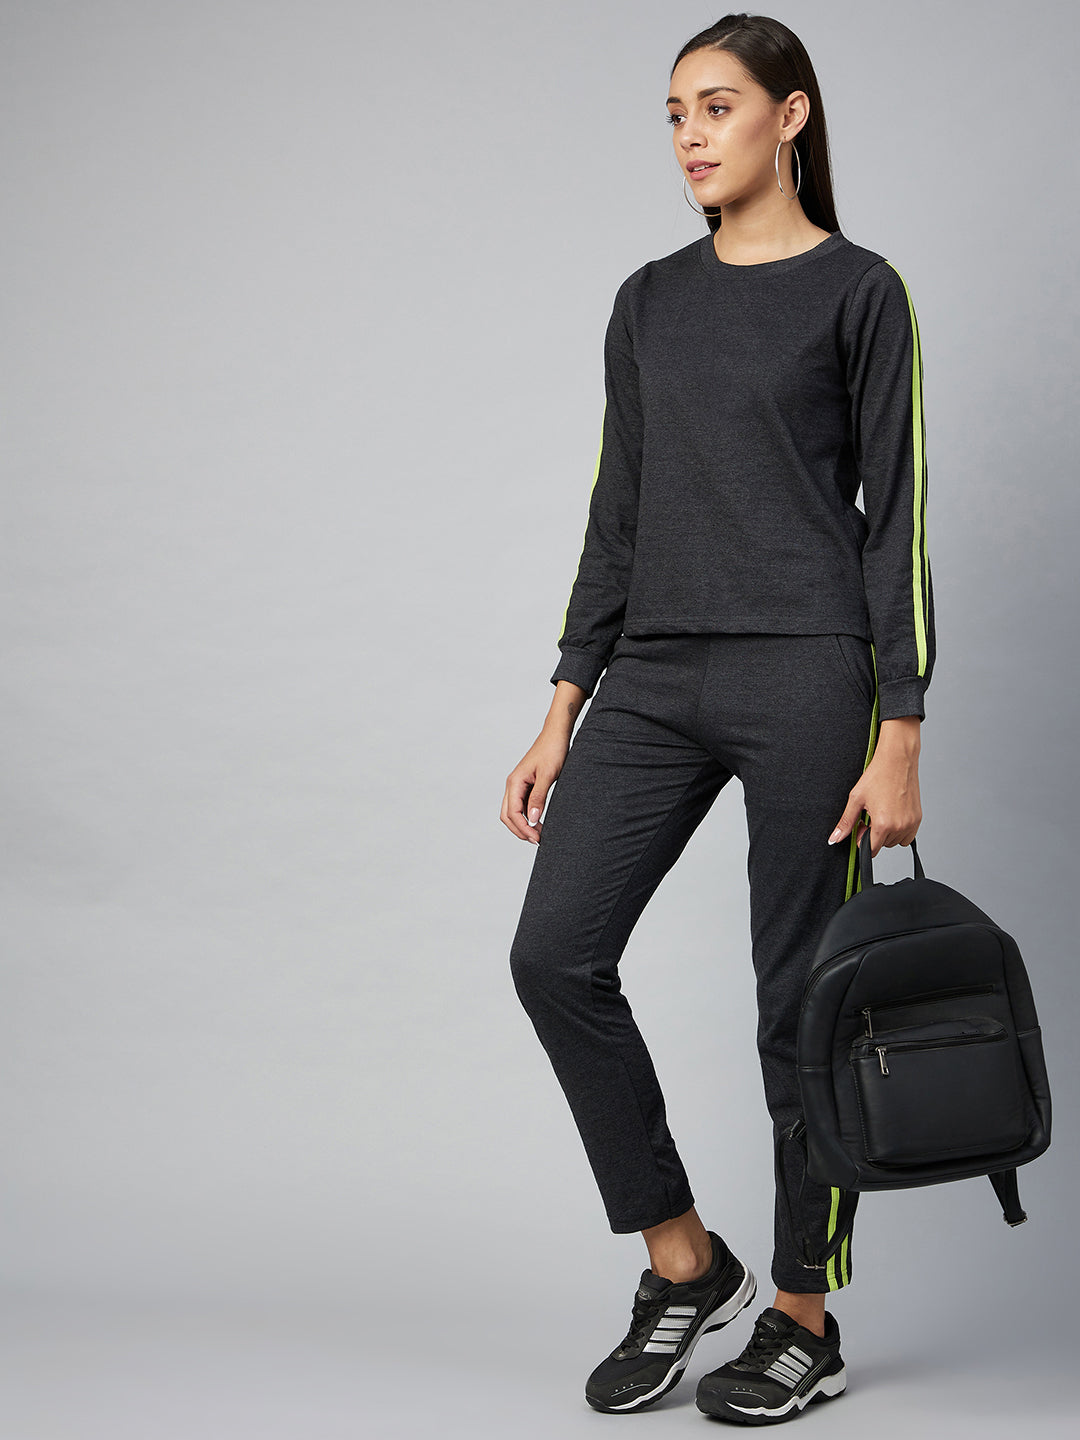 Women's Cotton Dark Grey Track Suit Set with Lime Green Stripe